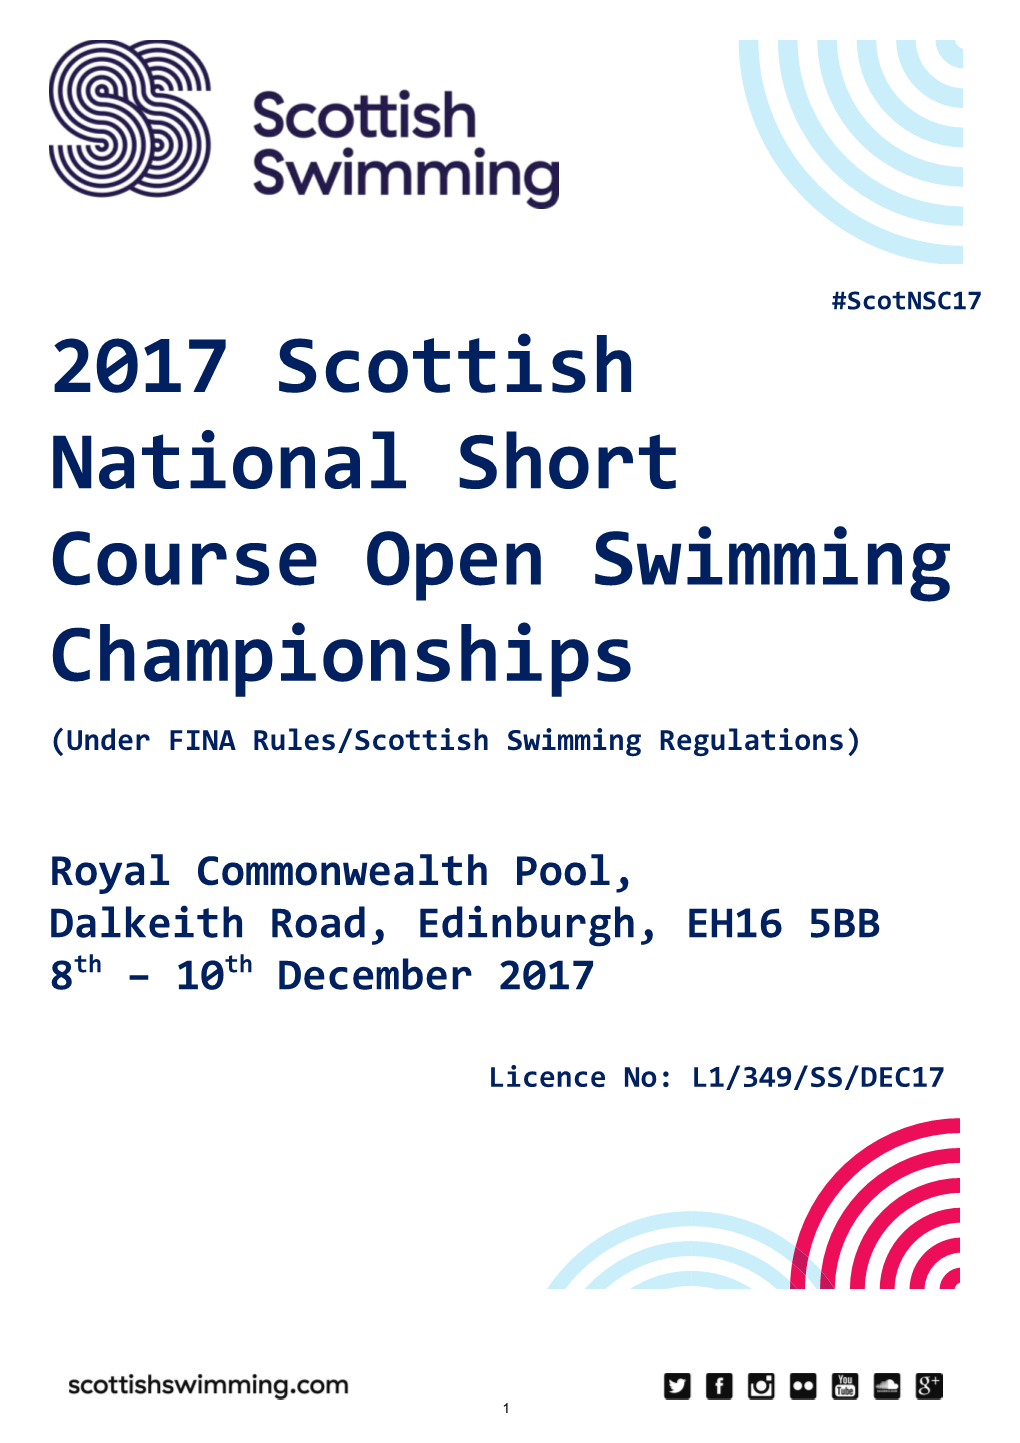 National Short Course Open Swimming Championships